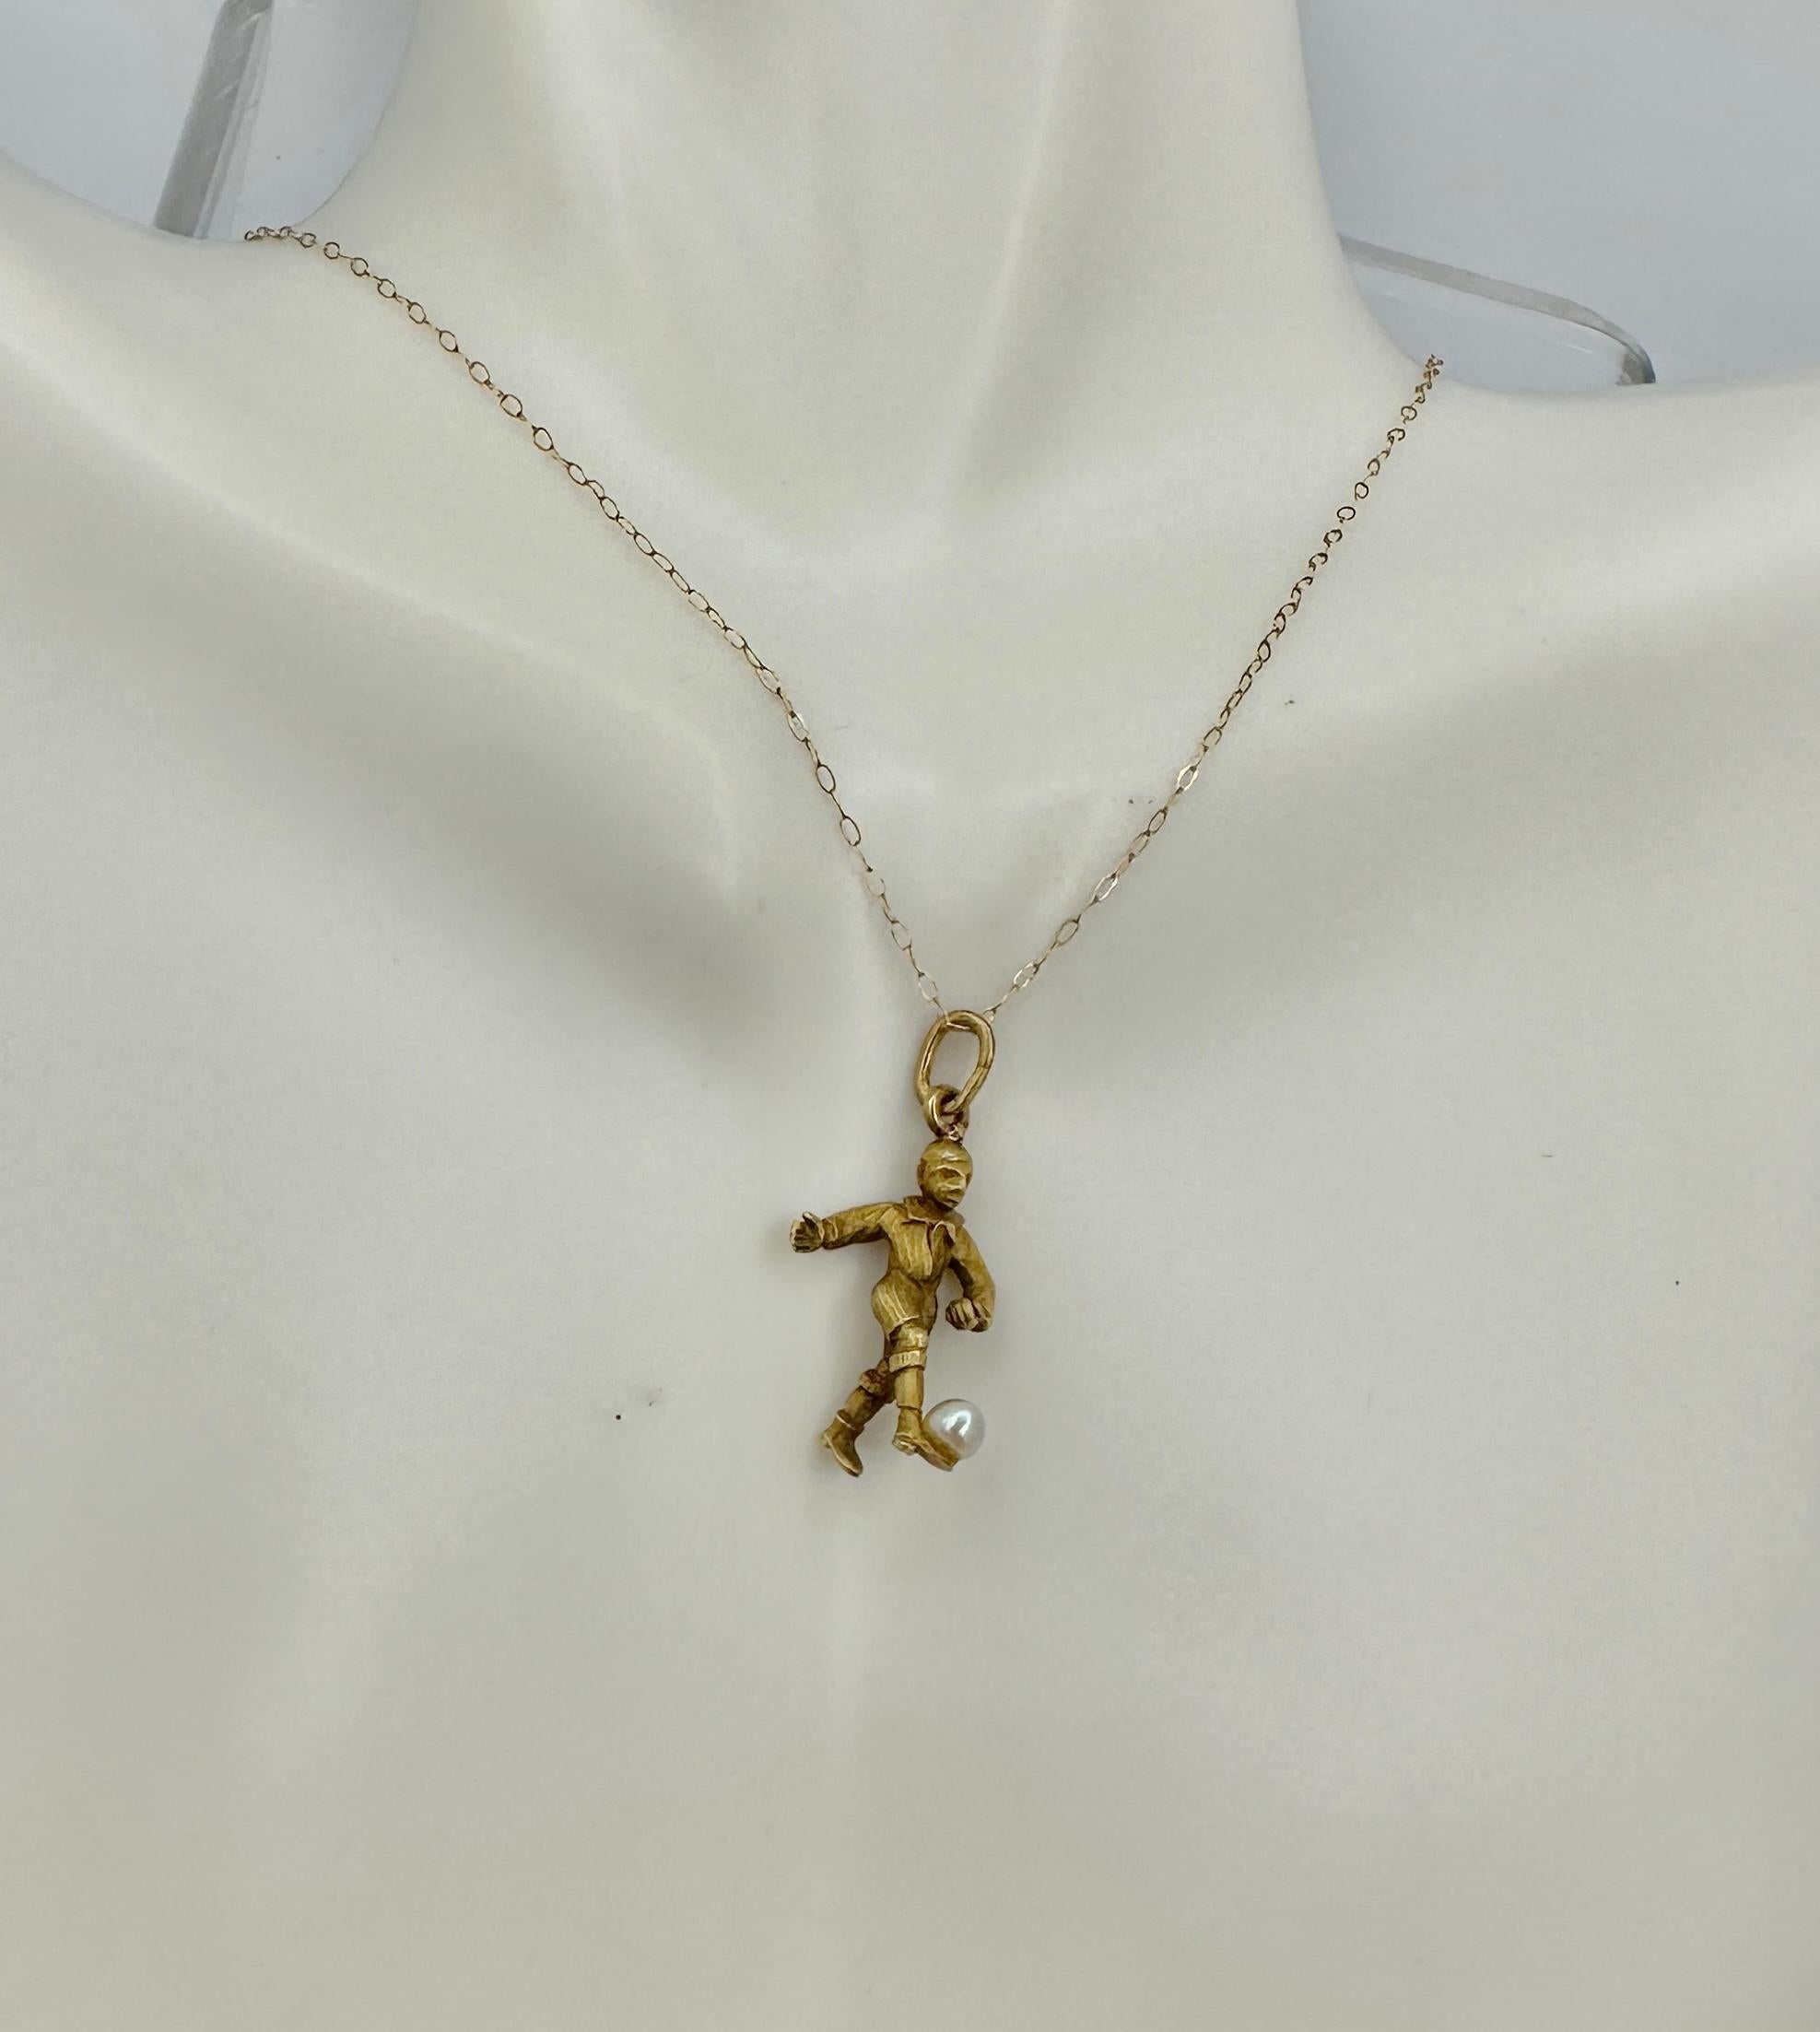 THIS IS A WONDERFUL ANTIQUE ART DECO PENDANT OR CHARM IN THE FORM OF A SOCCER FOOTBALL PLAYER KICKING HIS PEARL BALL WITH WONDERFUL DETAILS IN THE FACE AND UNIFORM AND IN 10 KARAT GOLD - A SPECIAL PIECE DATING TO CIRCA 1920.
The soccer football